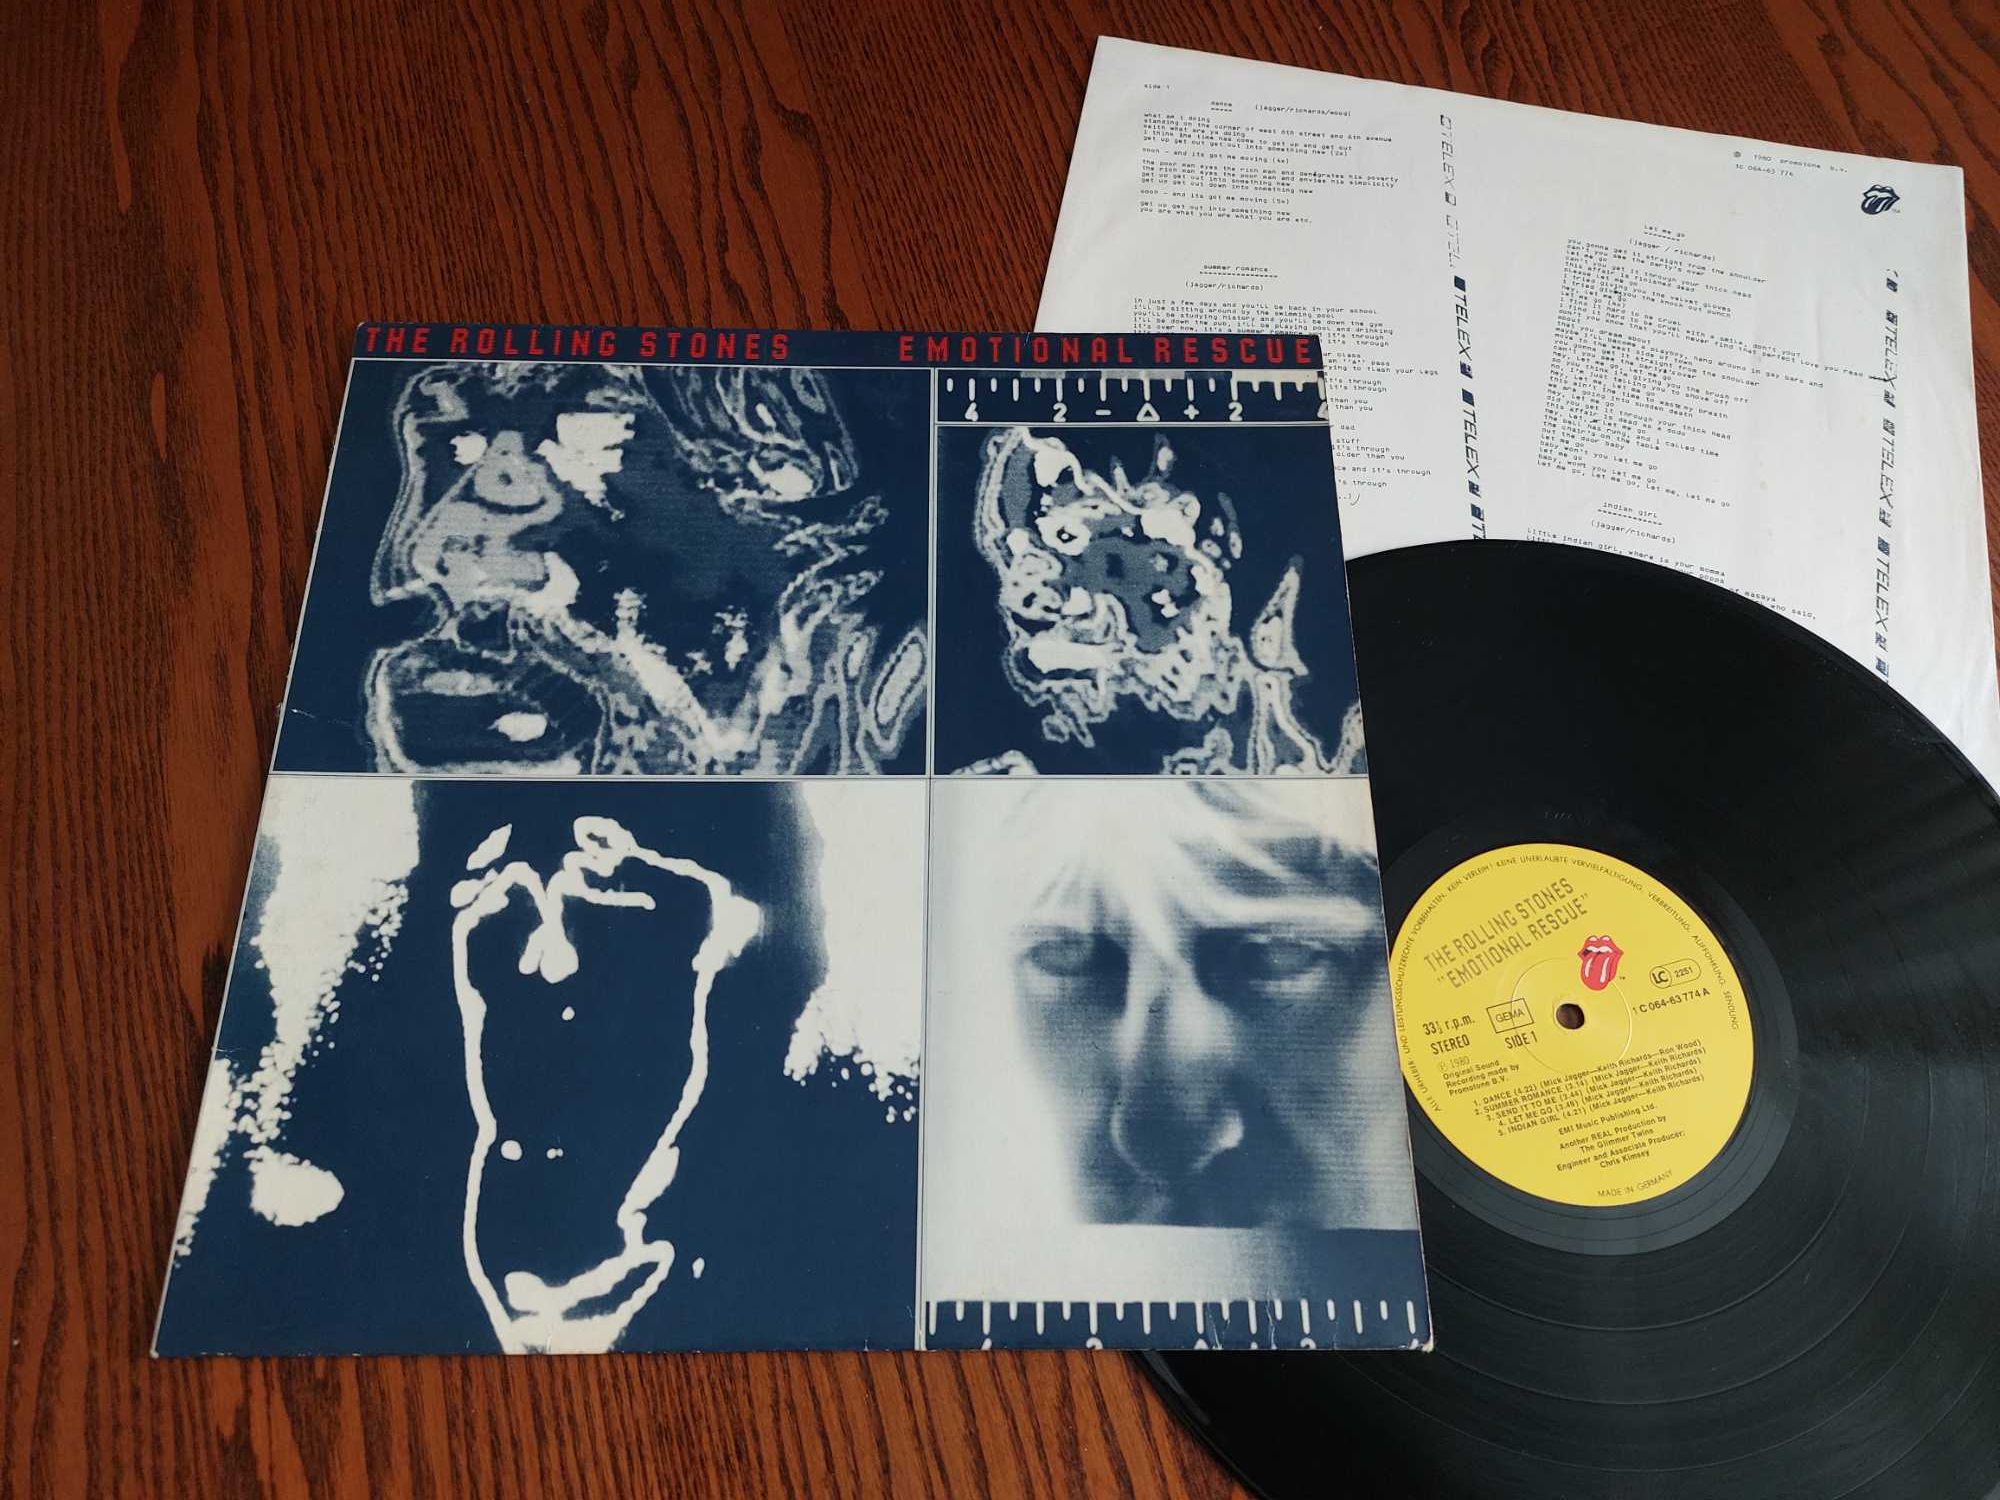 The Rolling Stones – Emotional Rescue lp 1979 EX STAN